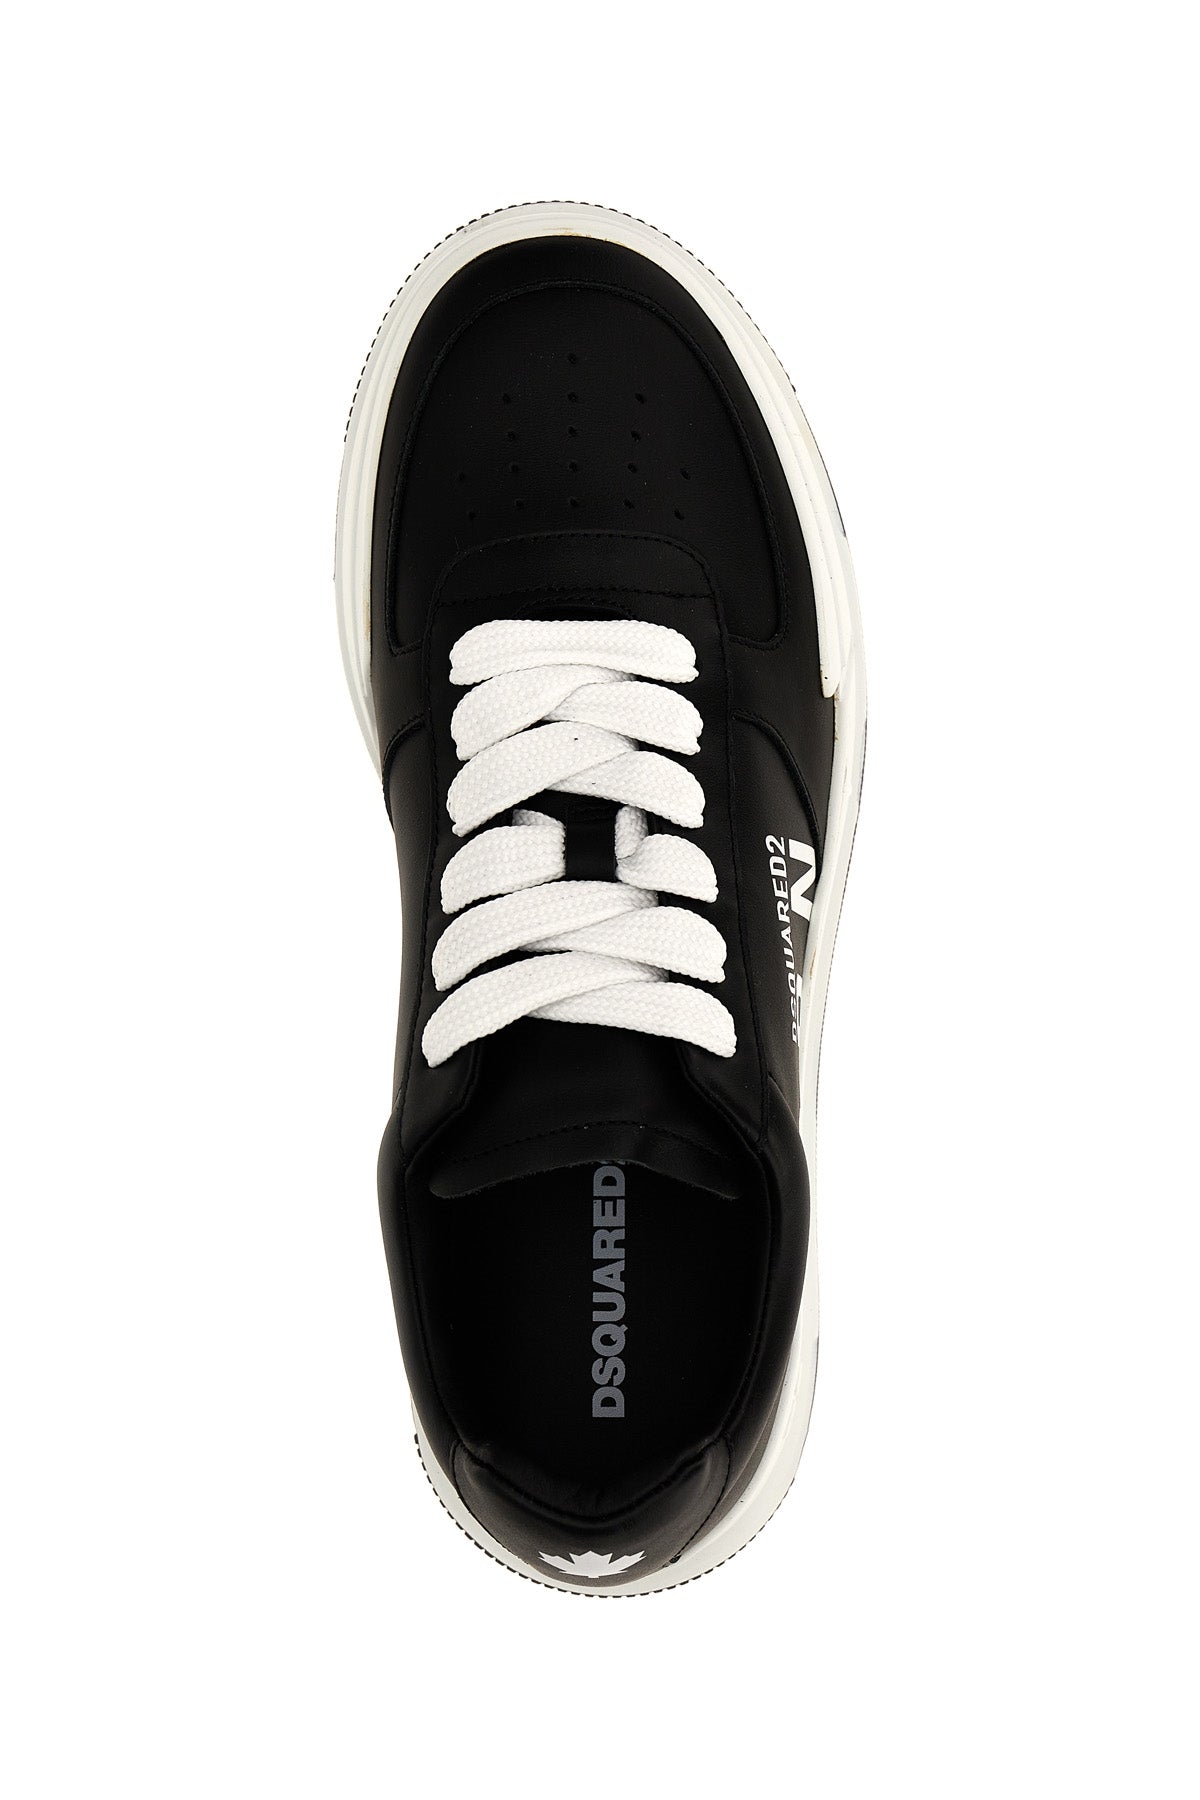 Dsquared2 'CANADIAN' SNEAKERS SNM031801502228M063